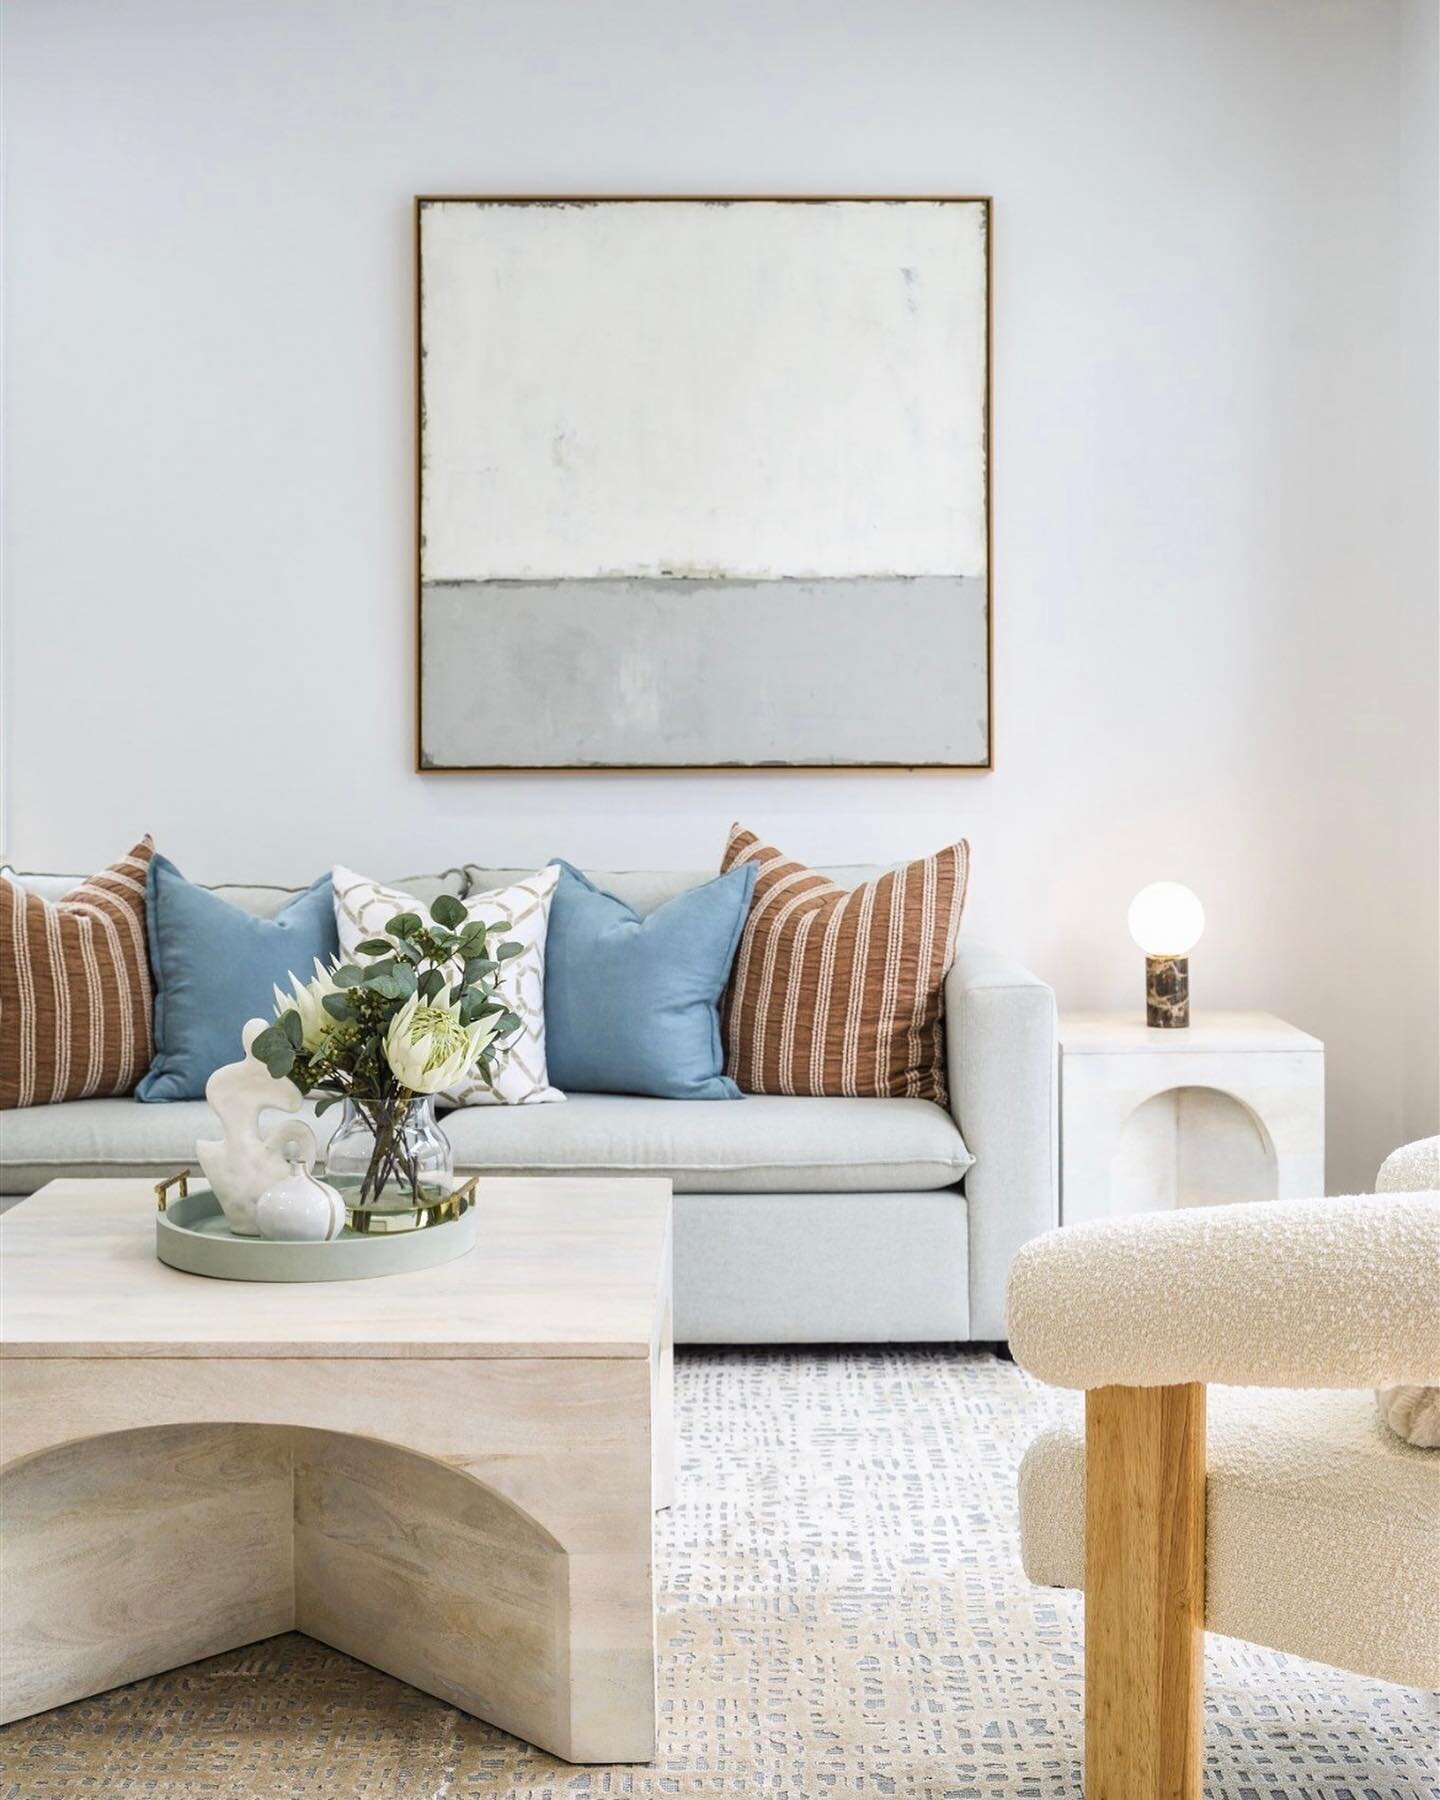 A little eye candy for your Friday afternoon 🩵🍭🩵

Styling @uptown_property_styling 
Builder @ardent_builders 
Selling agent  @sampatterson_dukerealty @dukerealty_
📷 @gabrielveitphotography

#propertystyling #homestaging #interiorstyling #realesta